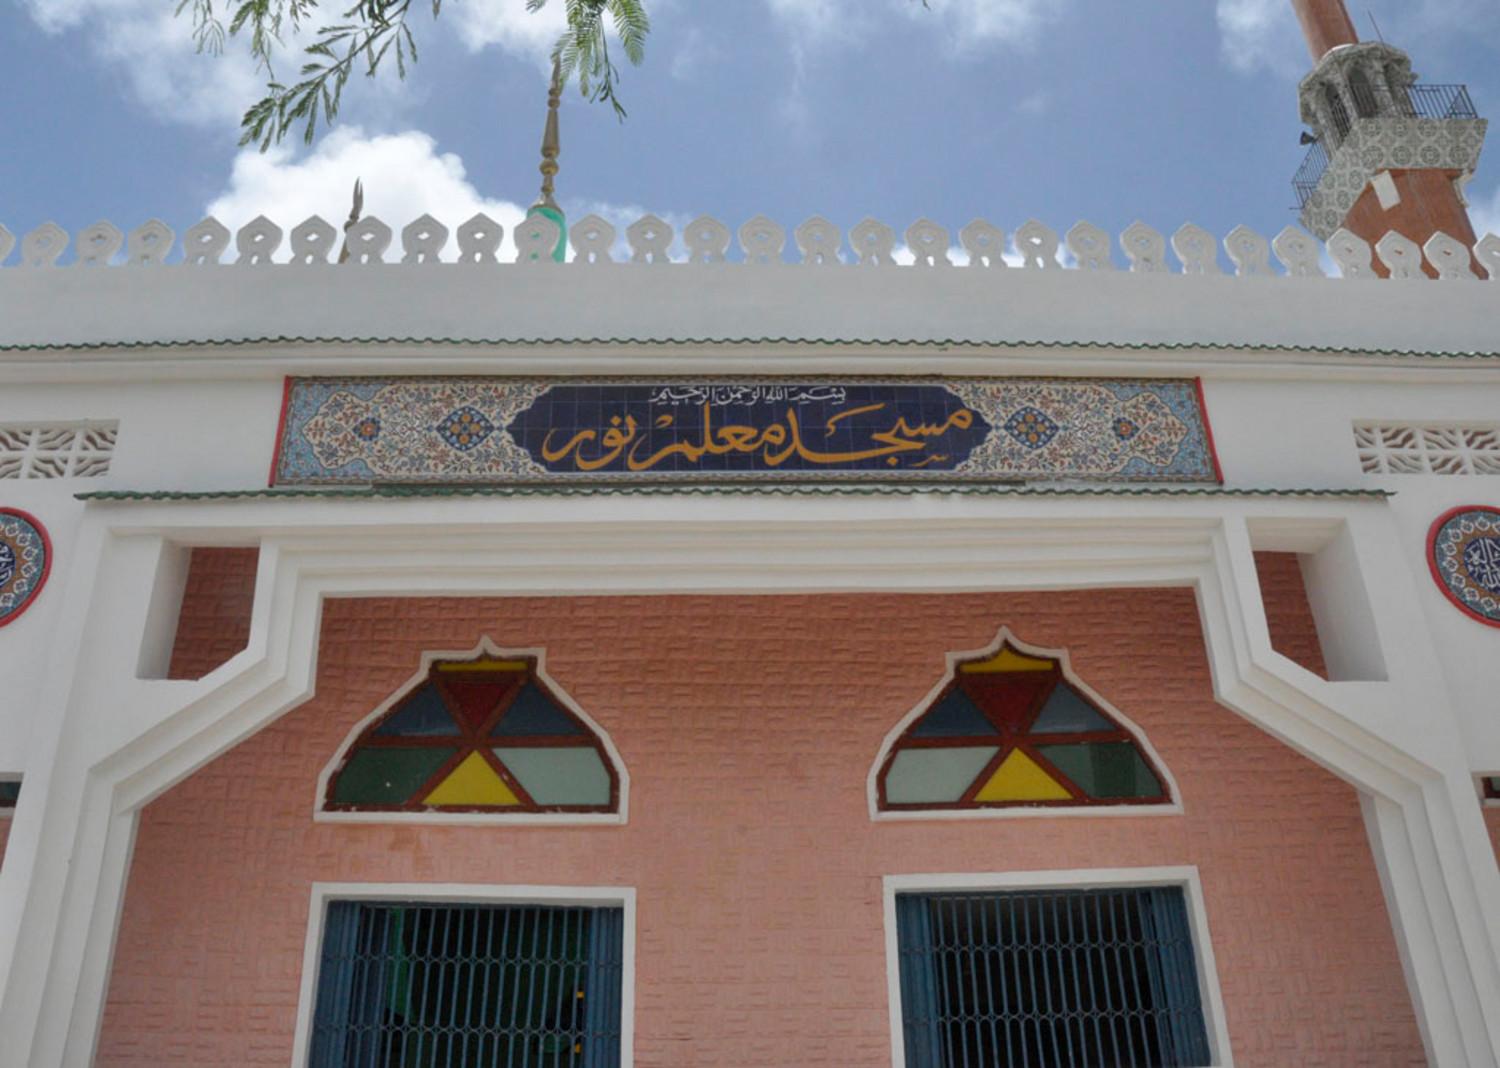 Entry arch with "Aabow Mo'alin Nur Mosque" above in Arabic script